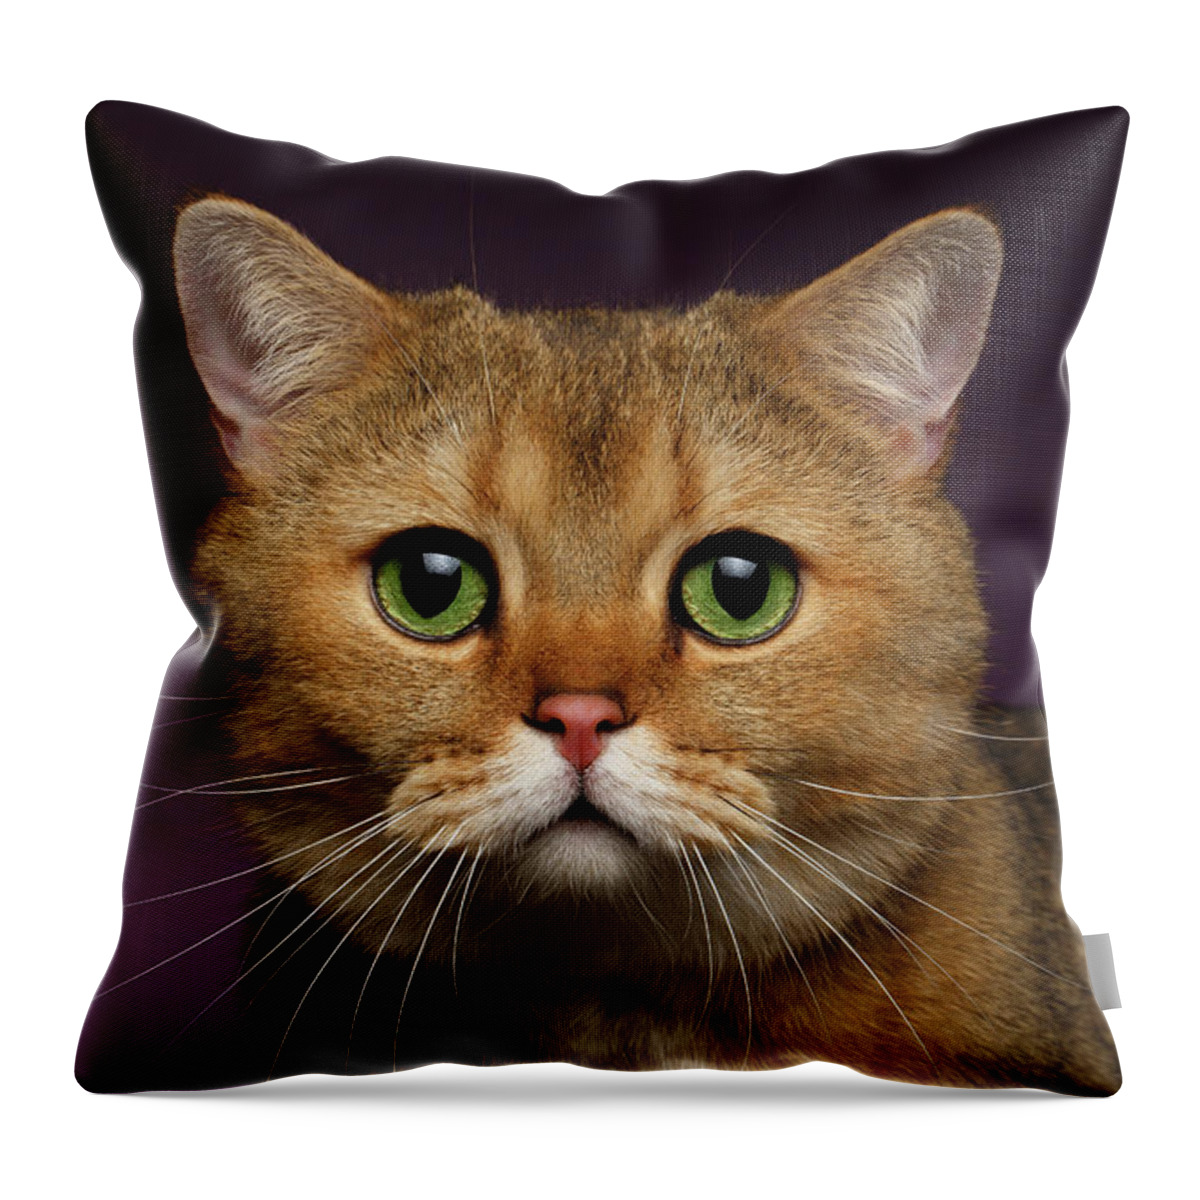 Looking Throw Pillow featuring the photograph Closeup Golden British cat with green eyes on purple by Sergey Taran